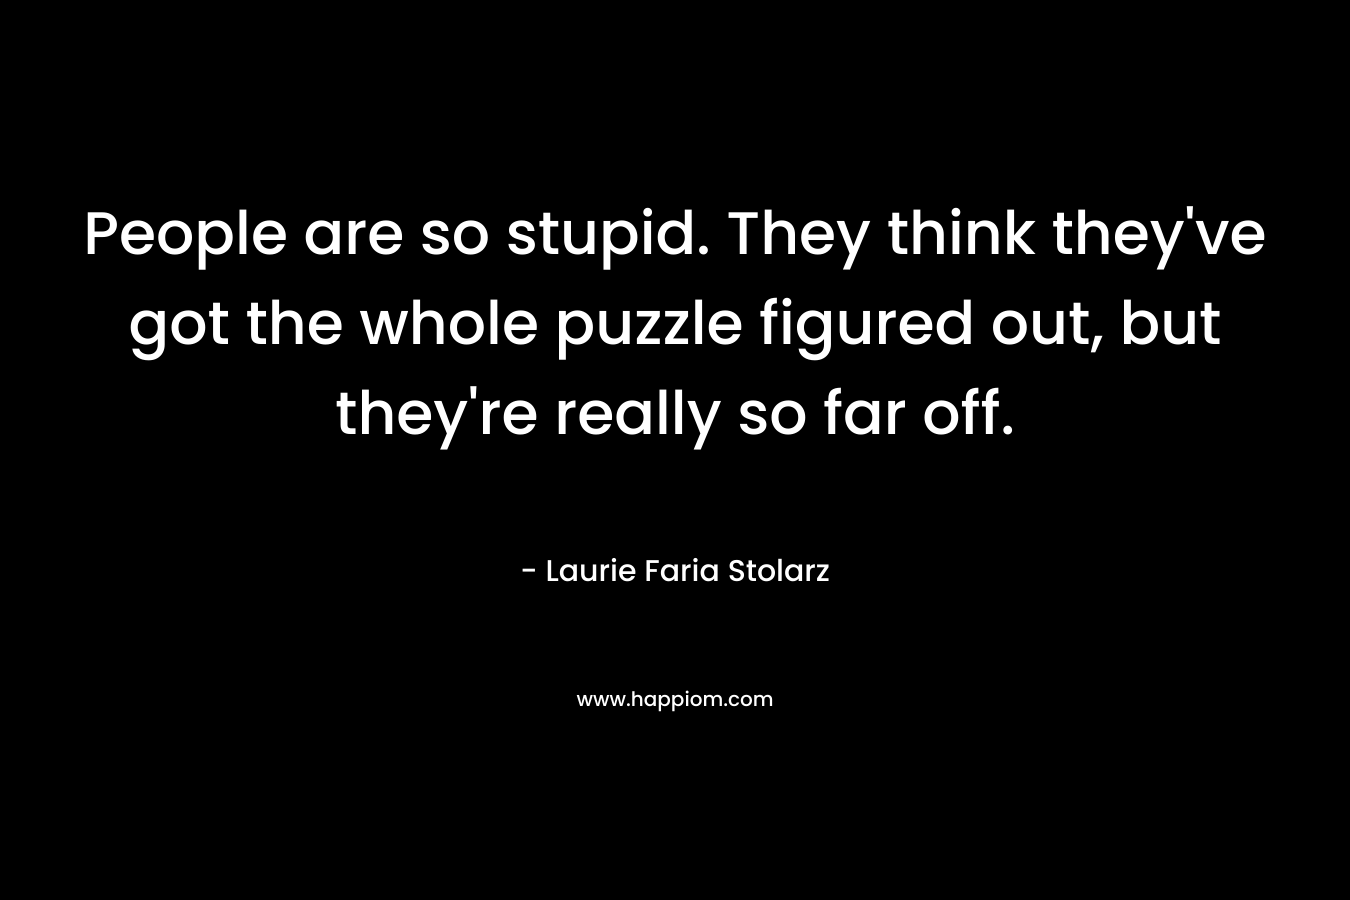 People are so stupid. They think they’ve got the whole puzzle figured out, but they’re really so far off. – Laurie Faria Stolarz